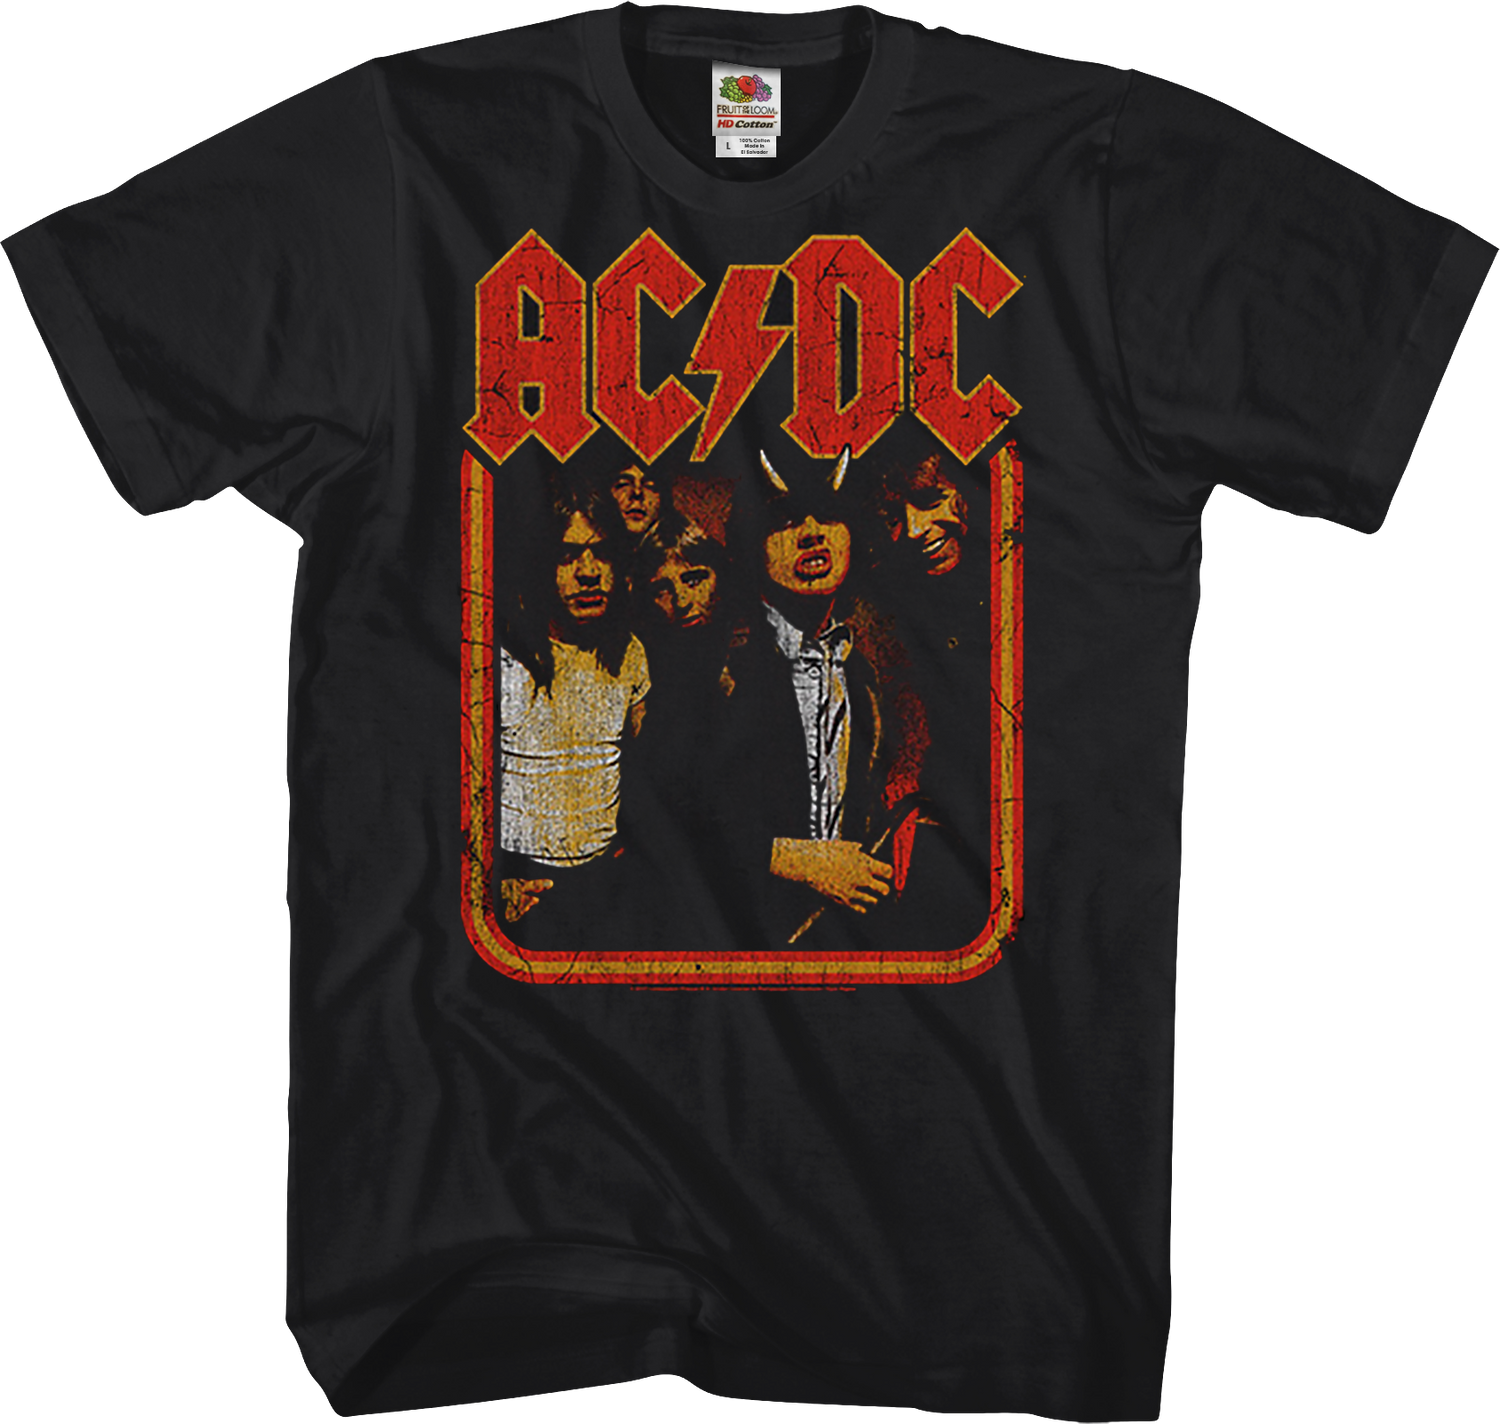 Retro Highway To Hell ACDC Shirt